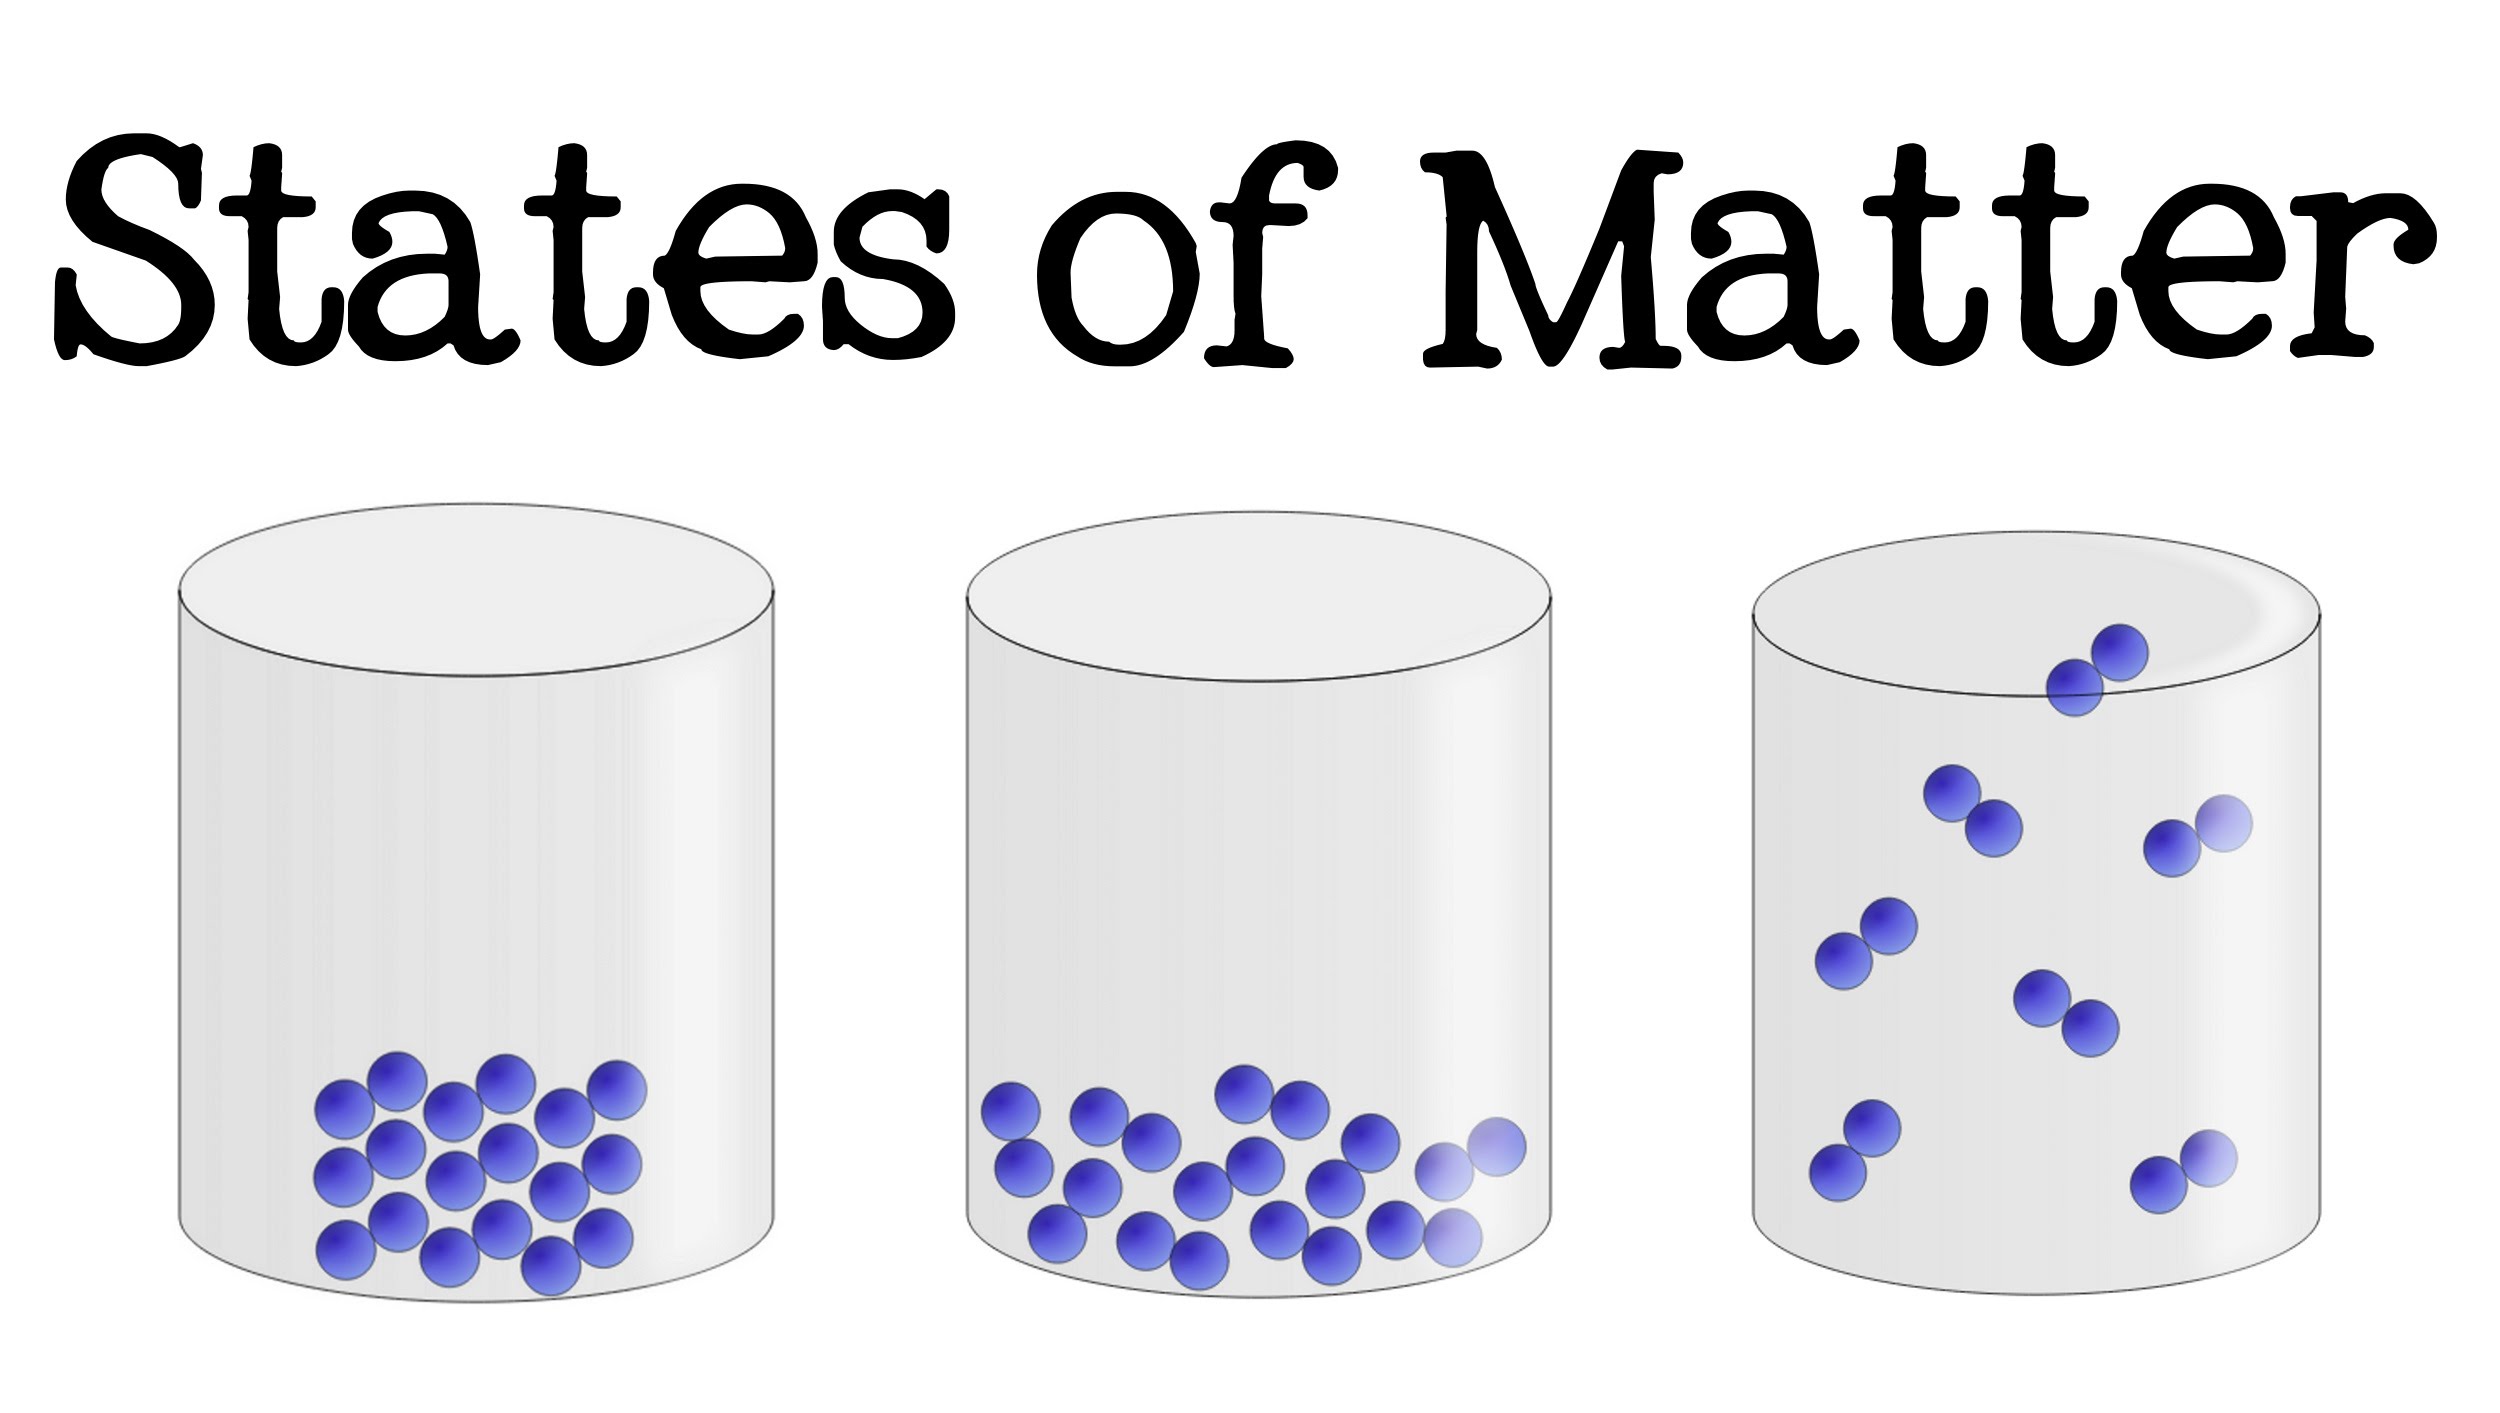 3 States of Matter for Kids (Solid, Liquid, Gas): Science for Children - FreeSchool - YouTube